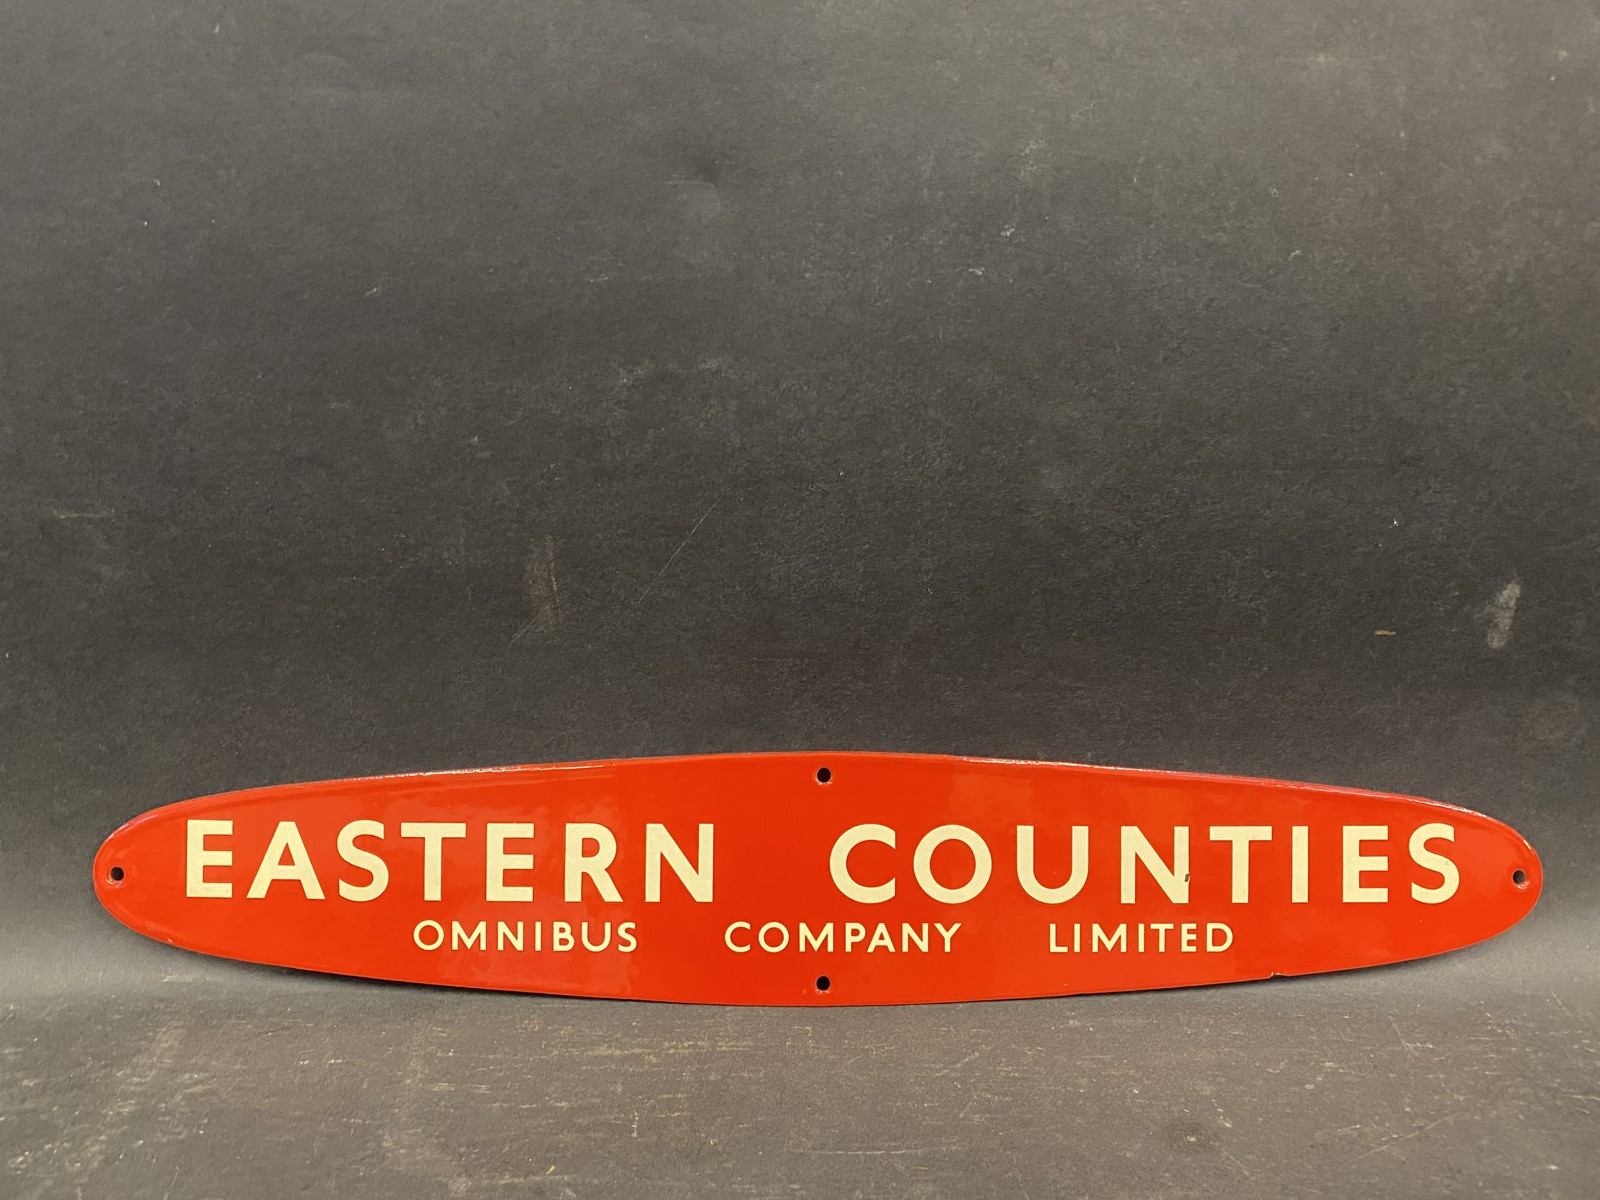 An Eastern Counties Omnibus Company Limited enamel oval header board sign, in very near mint